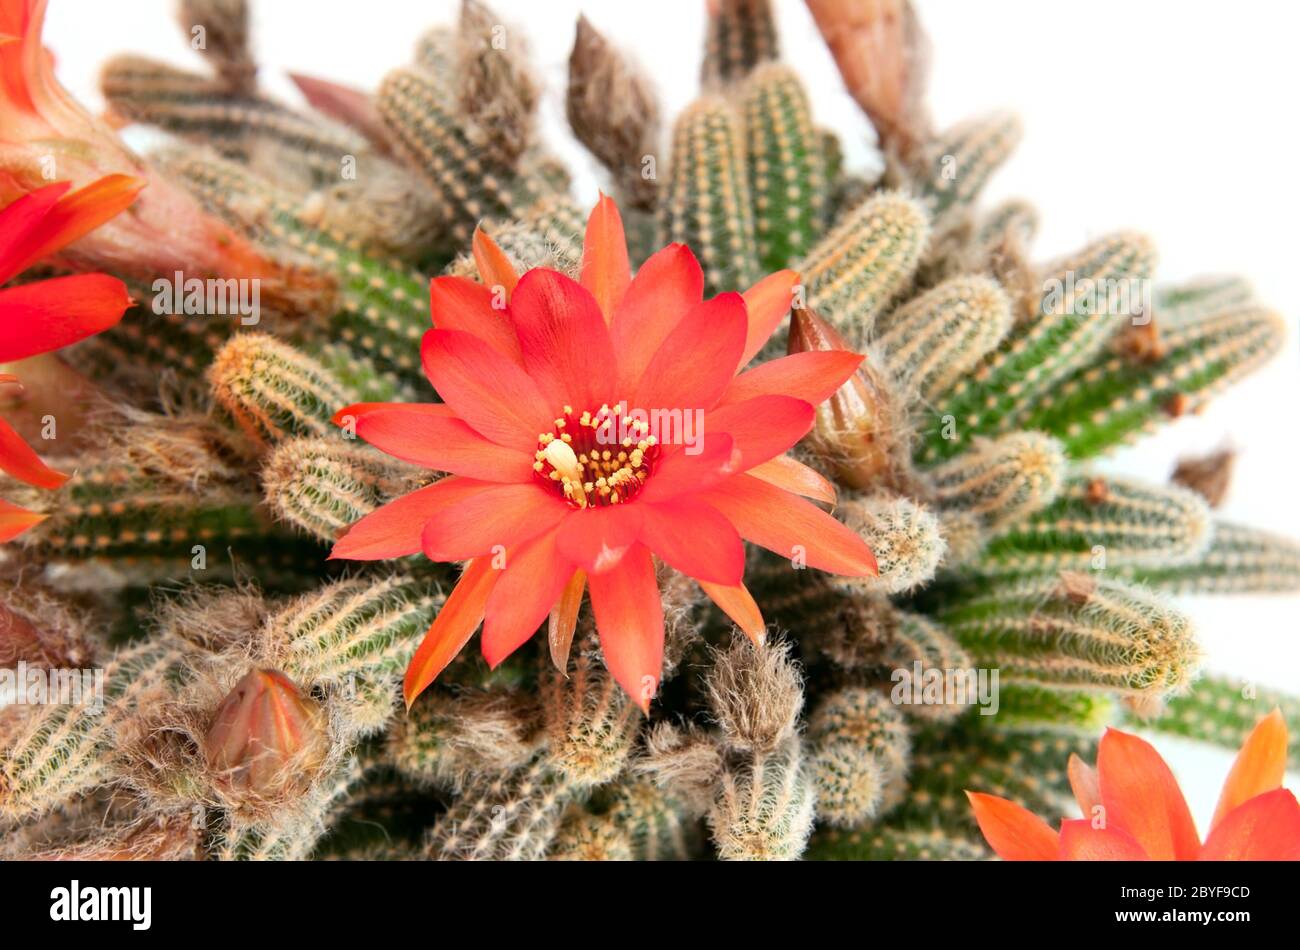 Red cactus flower over white Stock Photo